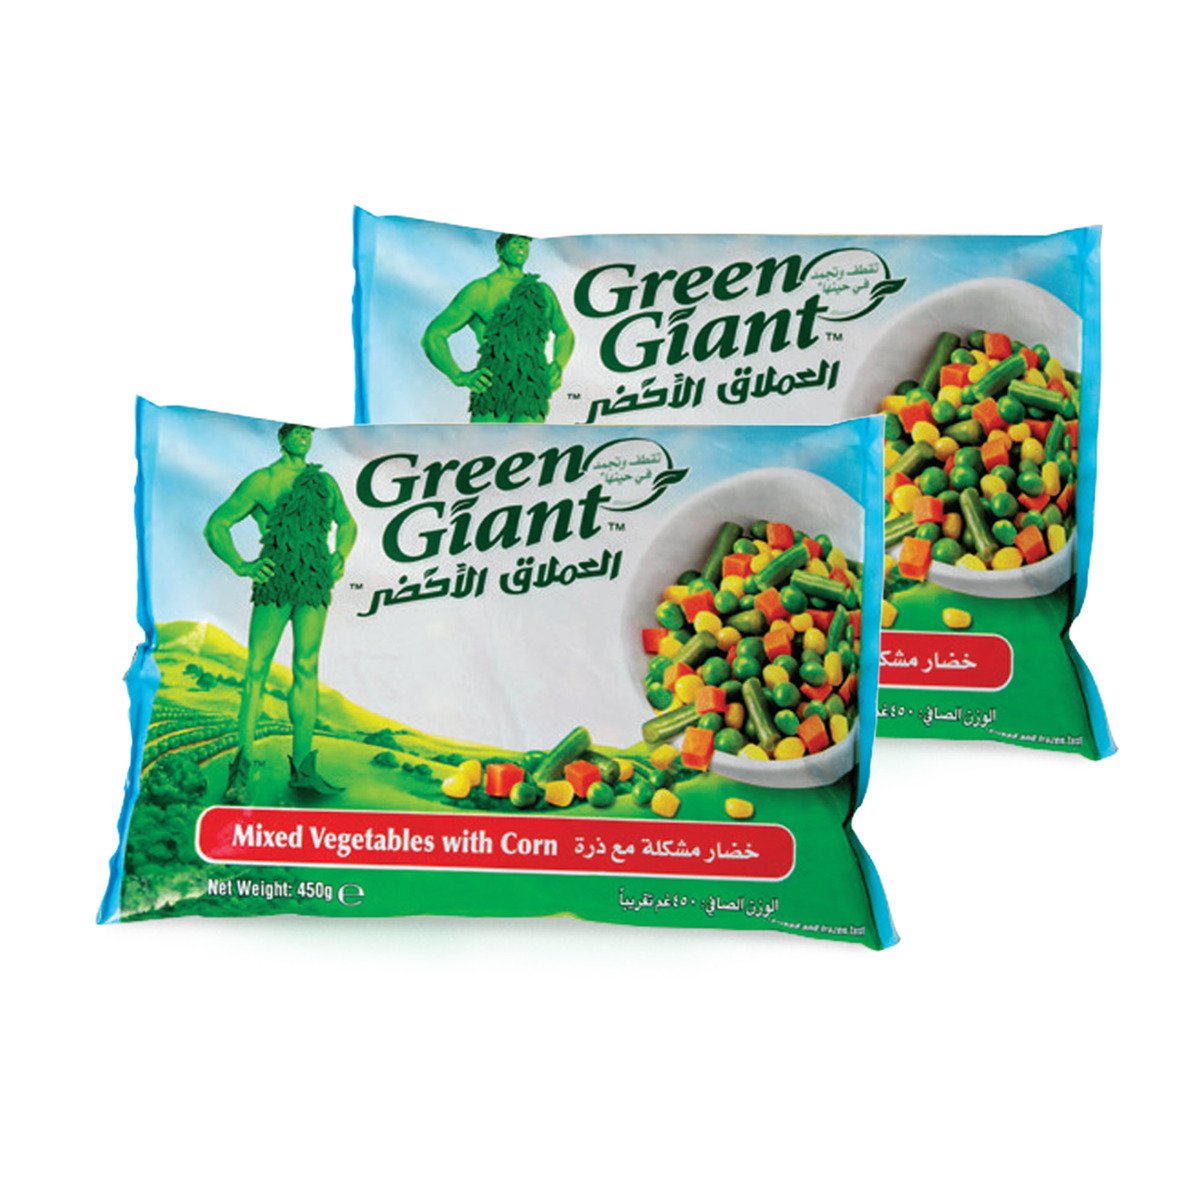 Green Giant Mixed Vegetables With Corn 2 x 450 g